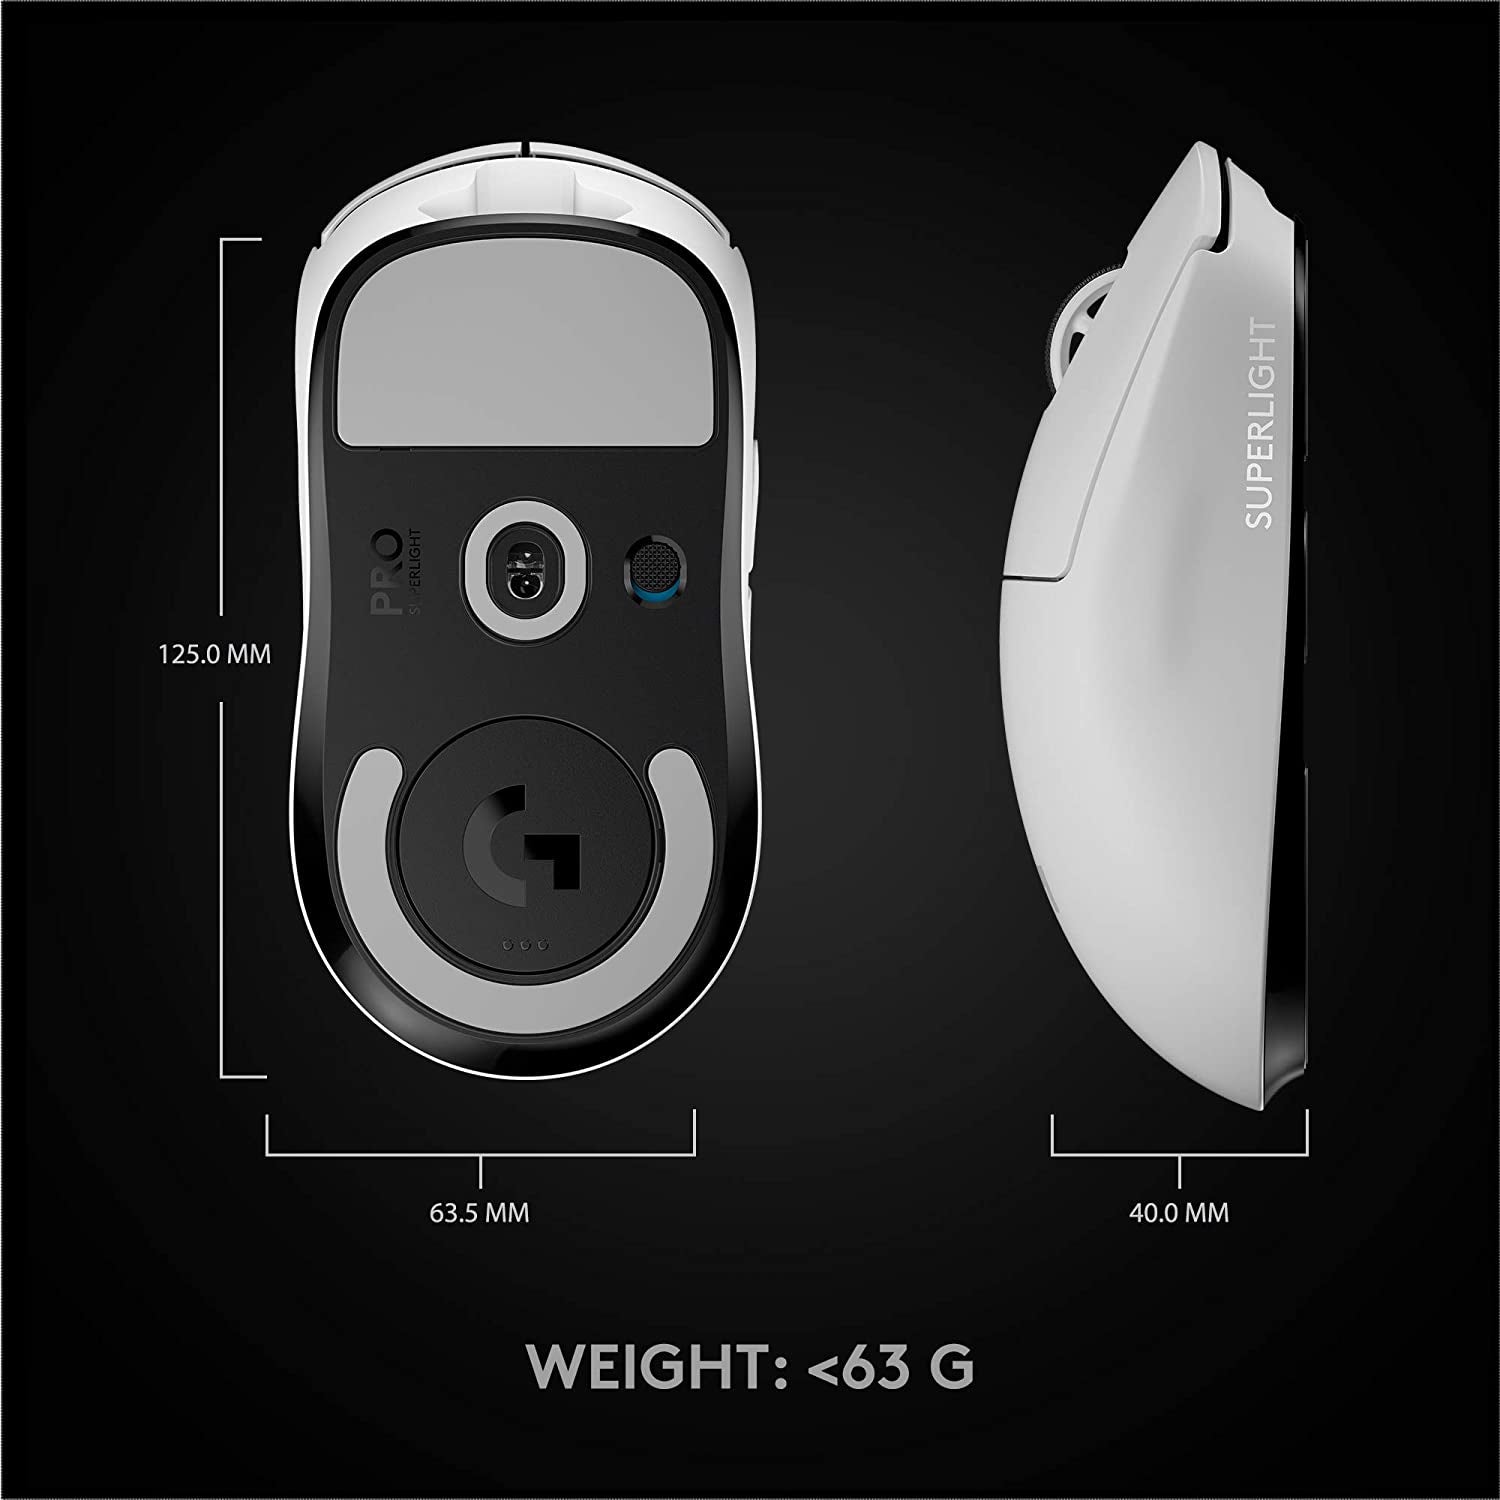 G PRO X SUPERLIGHT Wireless Gaming Mouse, Ultra-Lightweight, HERO 25K Sensor, 25,600 DPI, 5 Programmable Buttons, Long Battery Life, Compatible with PC / Mac - White